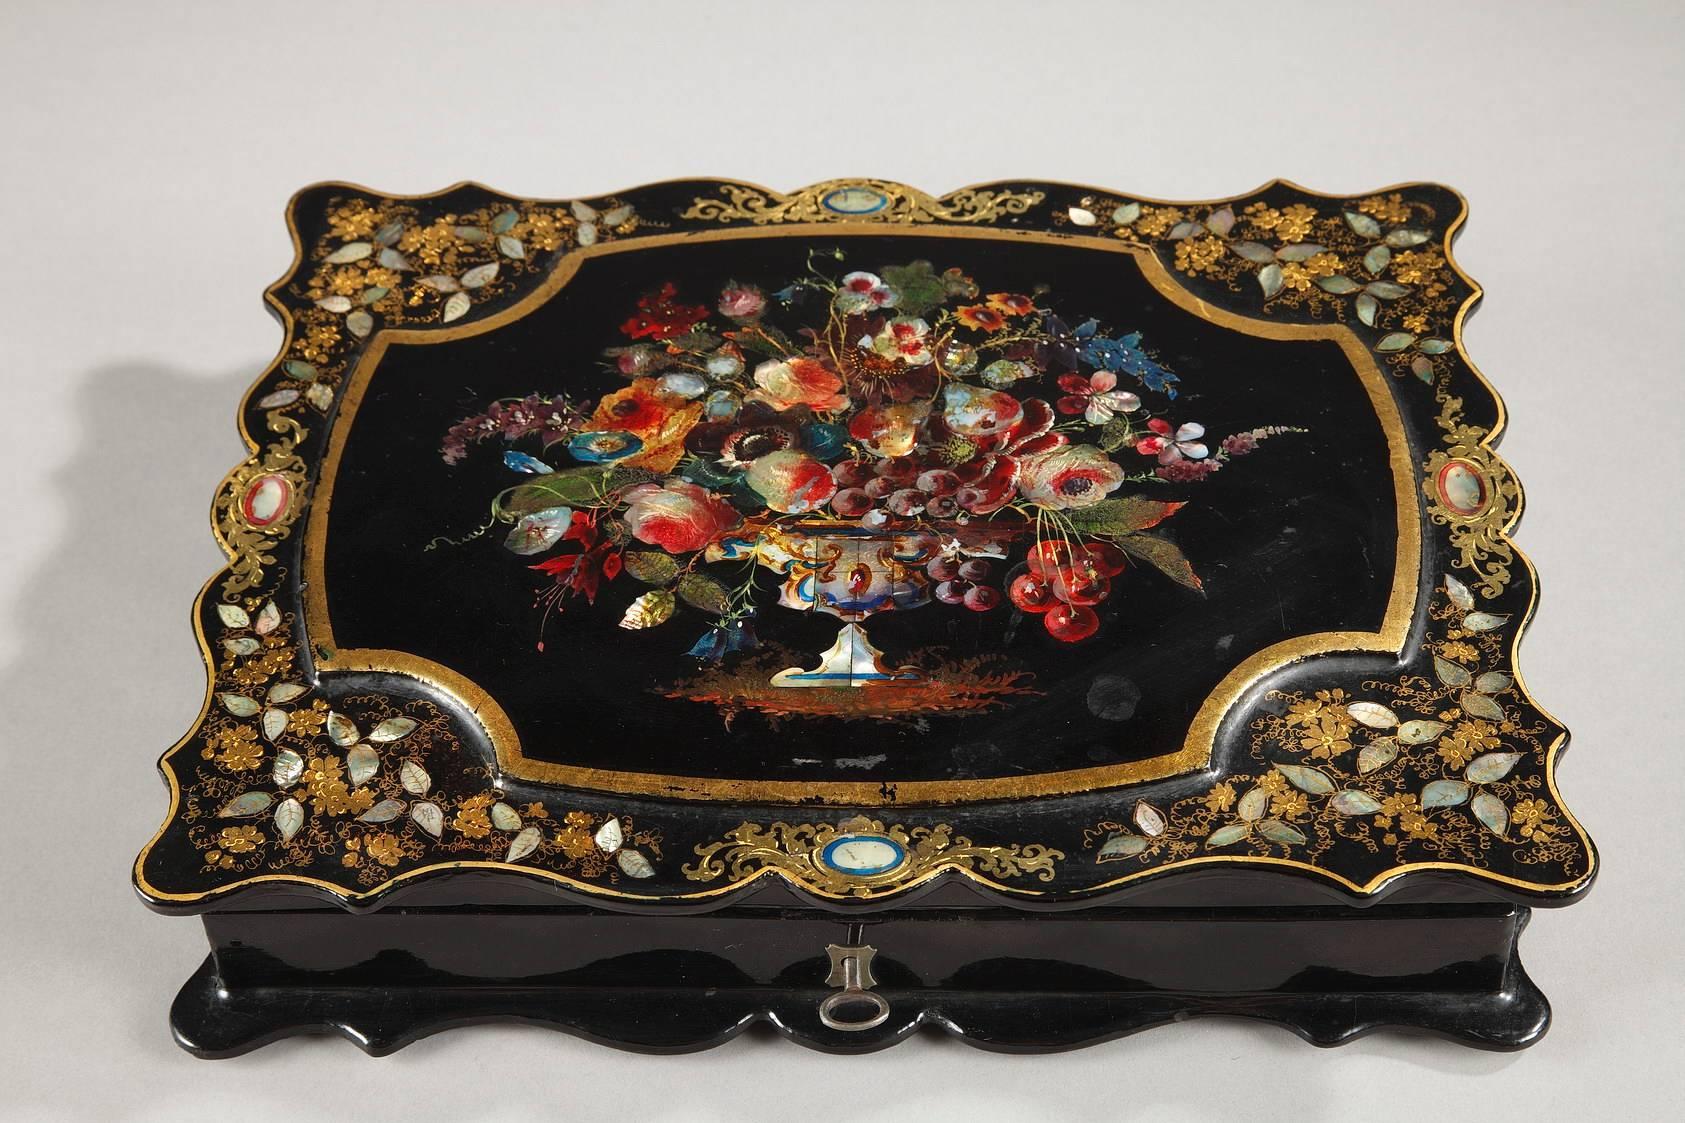 Napoleon III papier mâché́ box for card games with its original key. The lid is richly decorated with a multicolored bouquet of flowers in a central medallion with a gilt frame. It is surrounded by gilt, flowering branches with mother-of-pearl